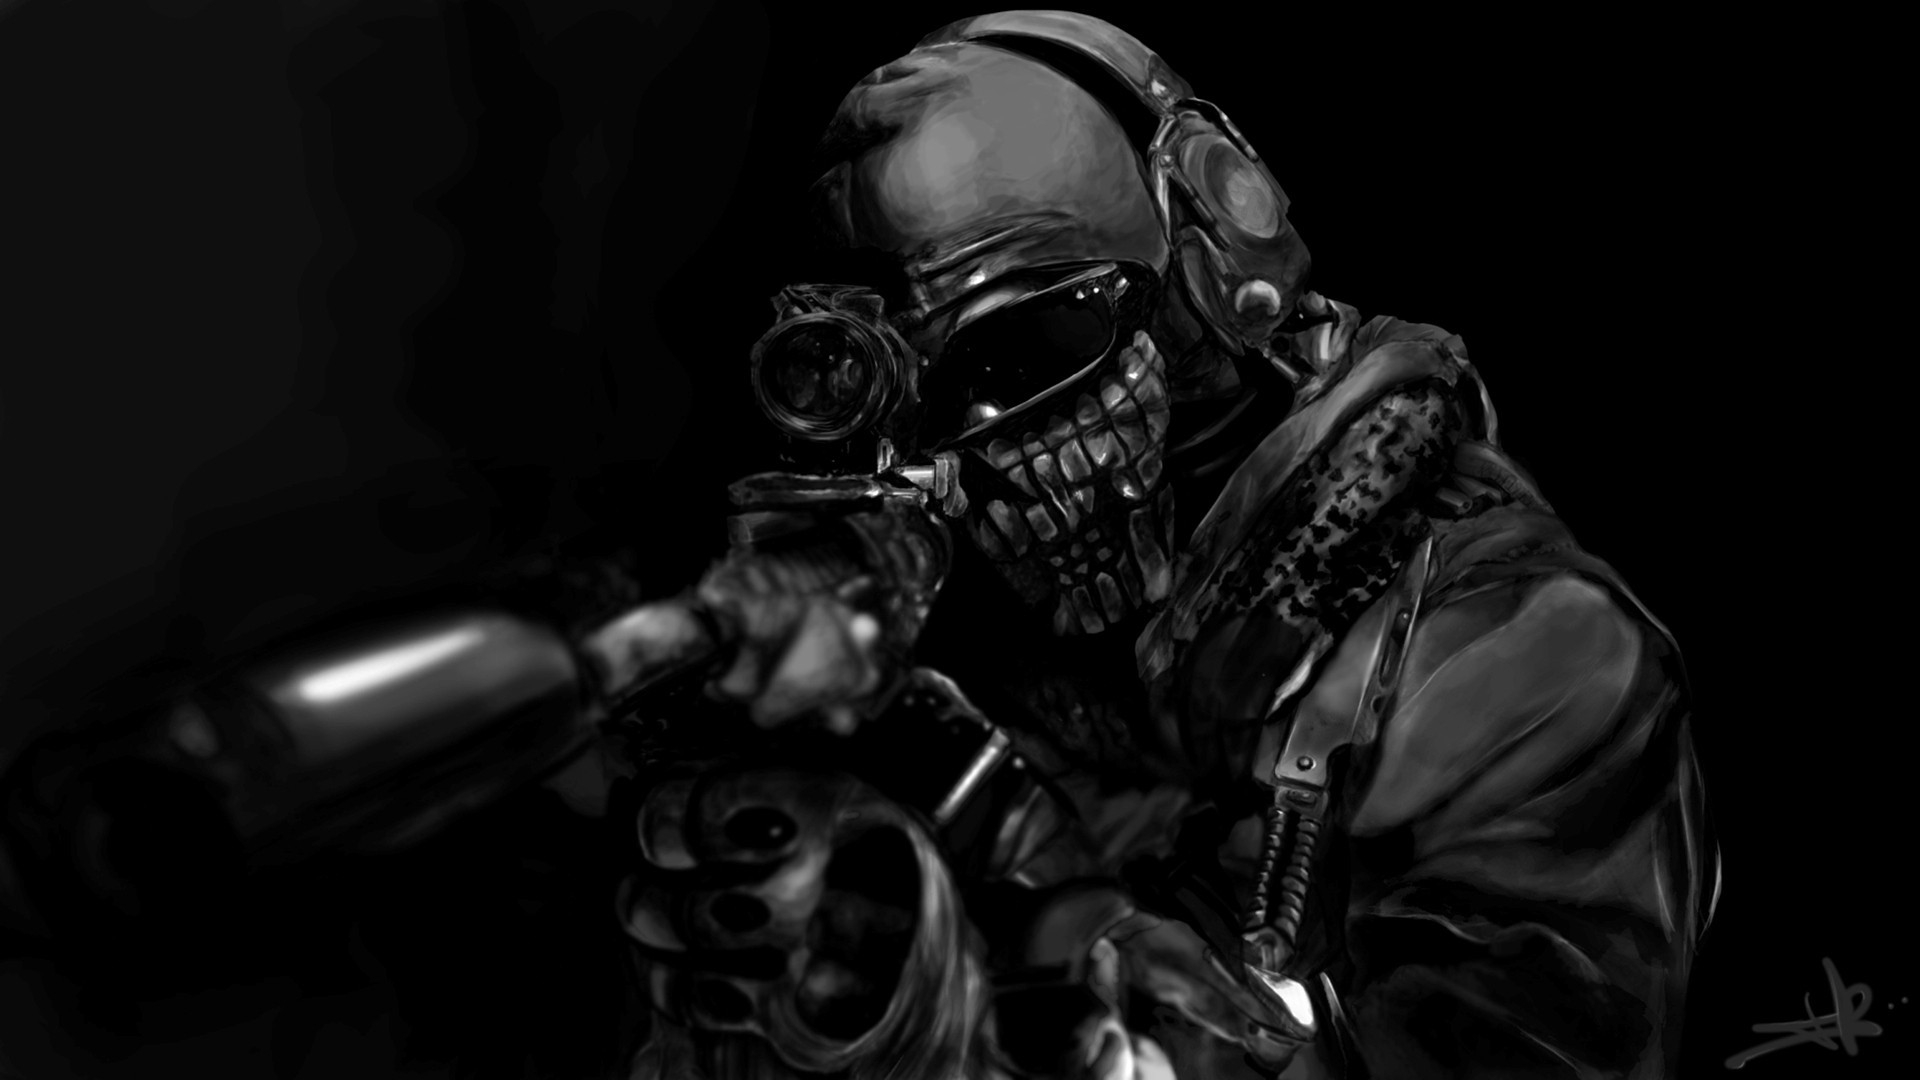 1920x1080 Wallpaper : video games, mask, Call of Duty Ghosts, sniper rifle, snipers, darkness, computer wallpaper, black and white, monochrome photography, film noir madkads 201160 HD Wallpapers